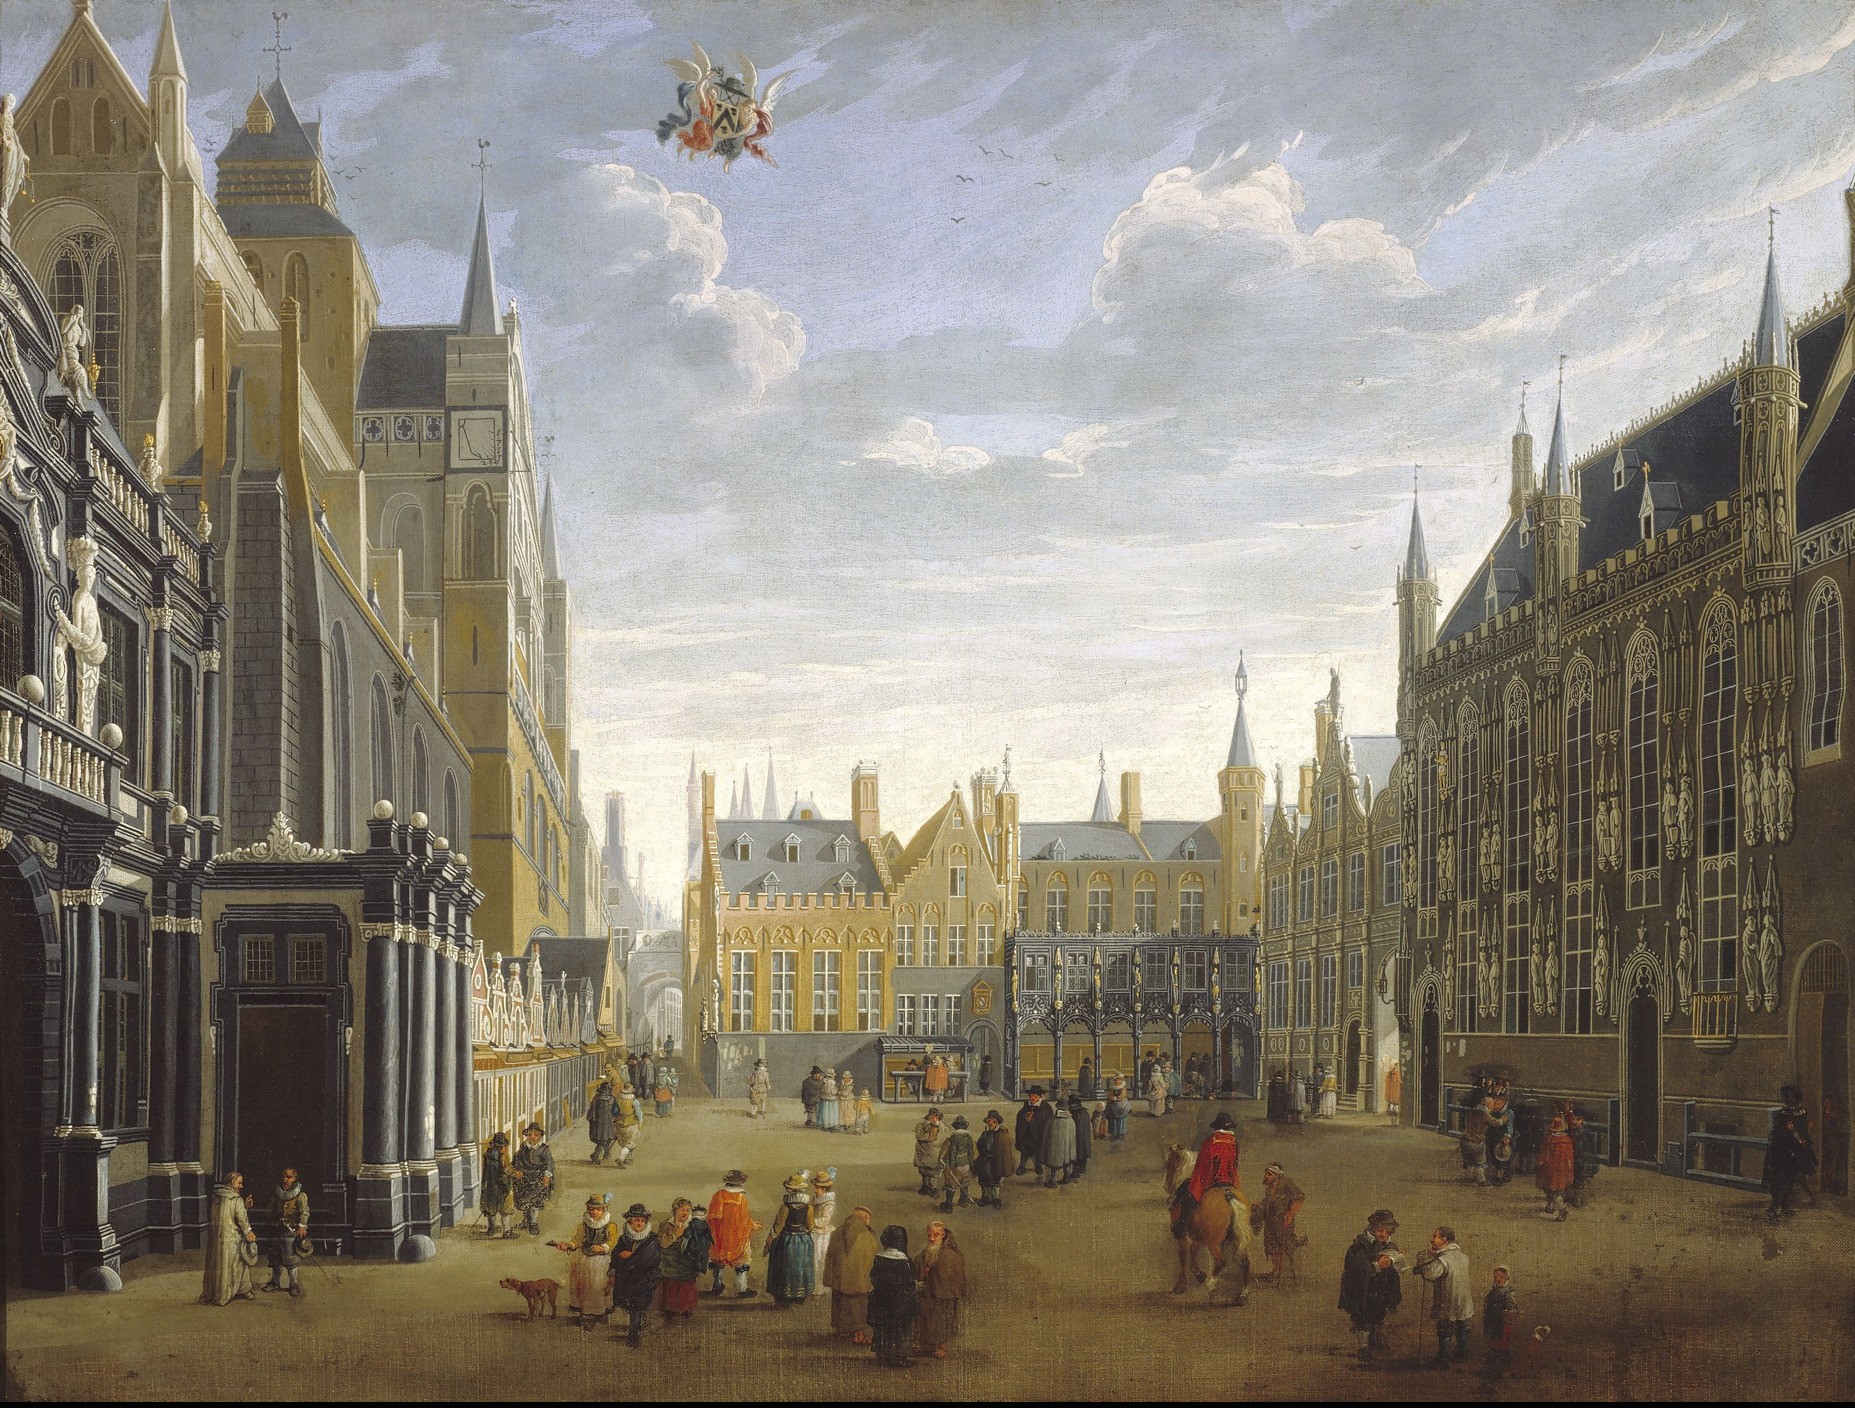 Artwork Painting People Traditional Art Bruges Belgium Old Building Town Square Oil Painting Clouds 1855x1408